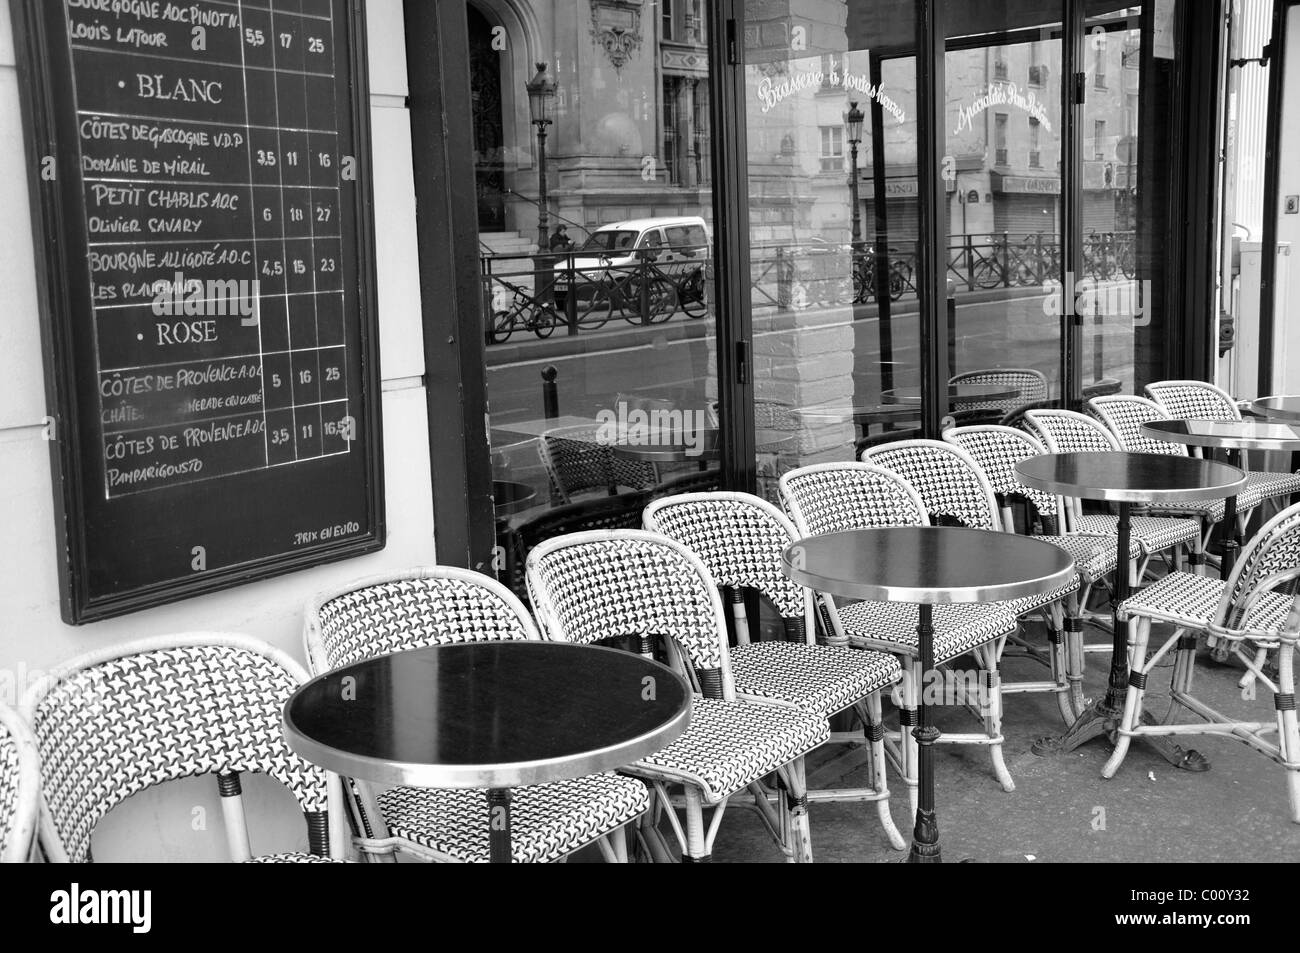 Cafe in Paris, France - black and white photograph Stock Photo